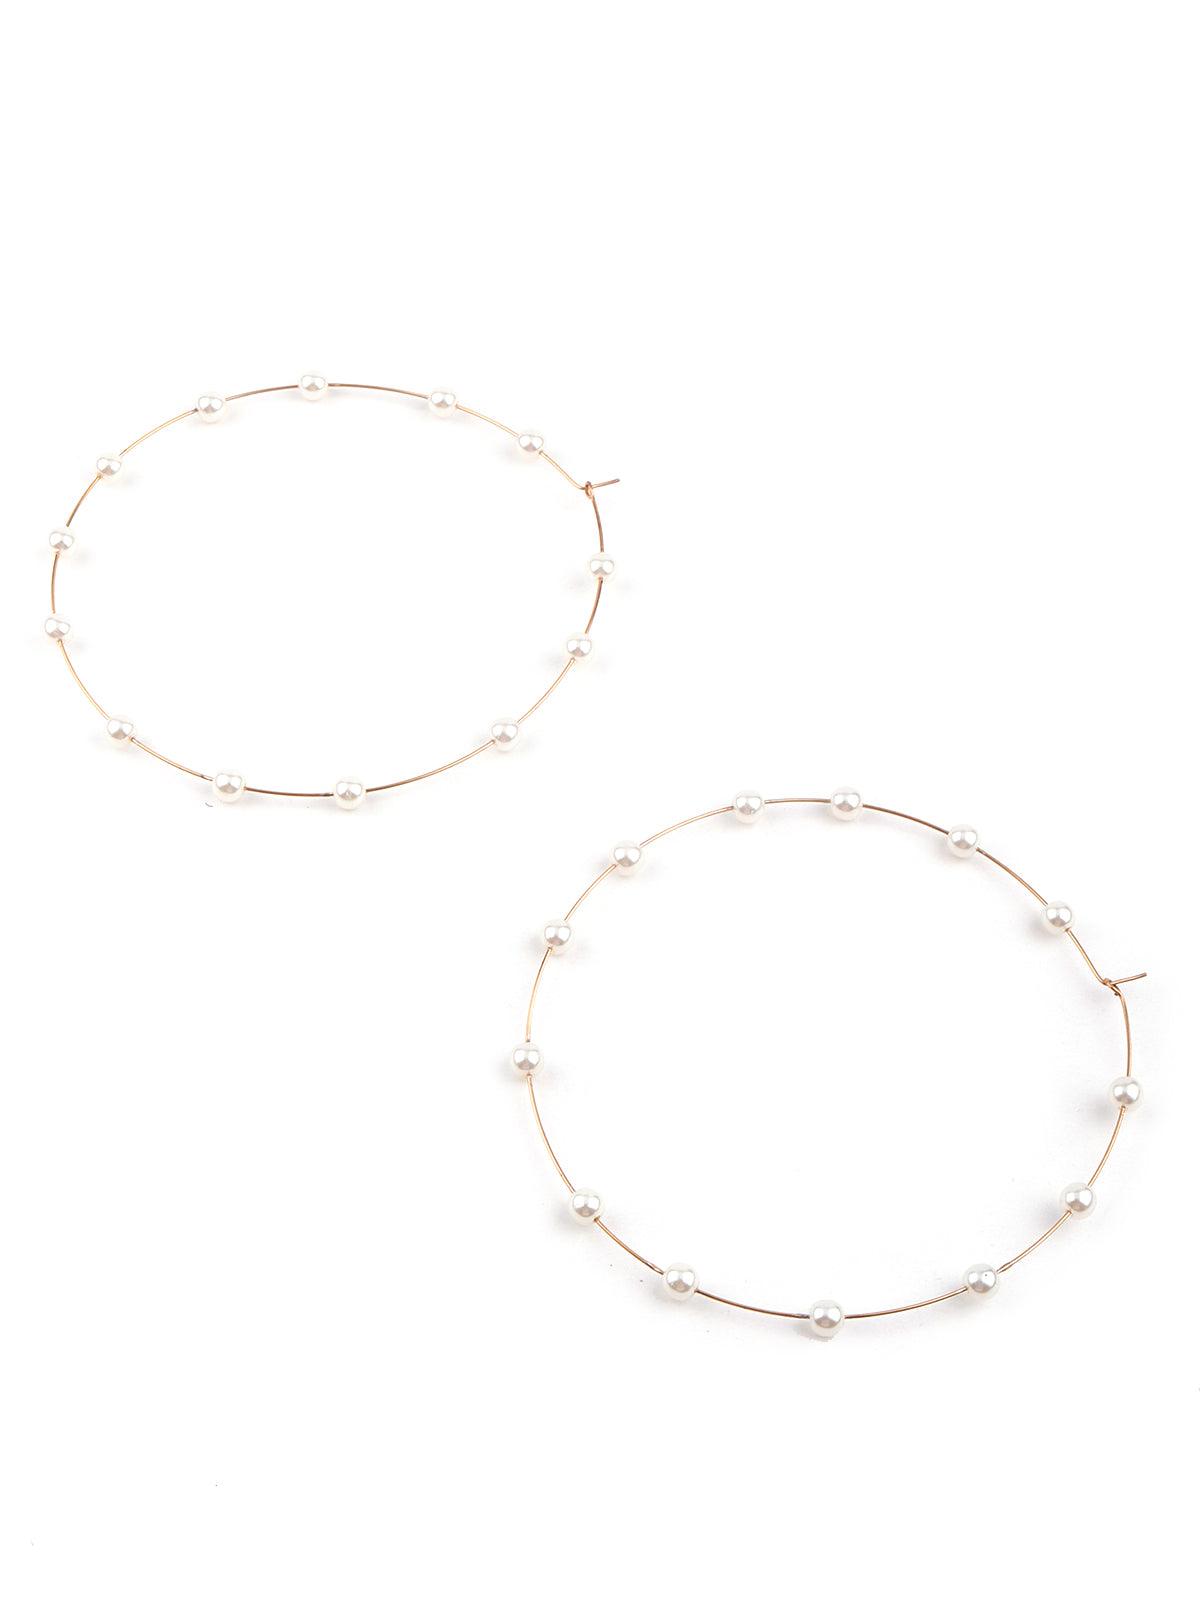 Gorgeous gold rounded embellished hoop earrings - Odette